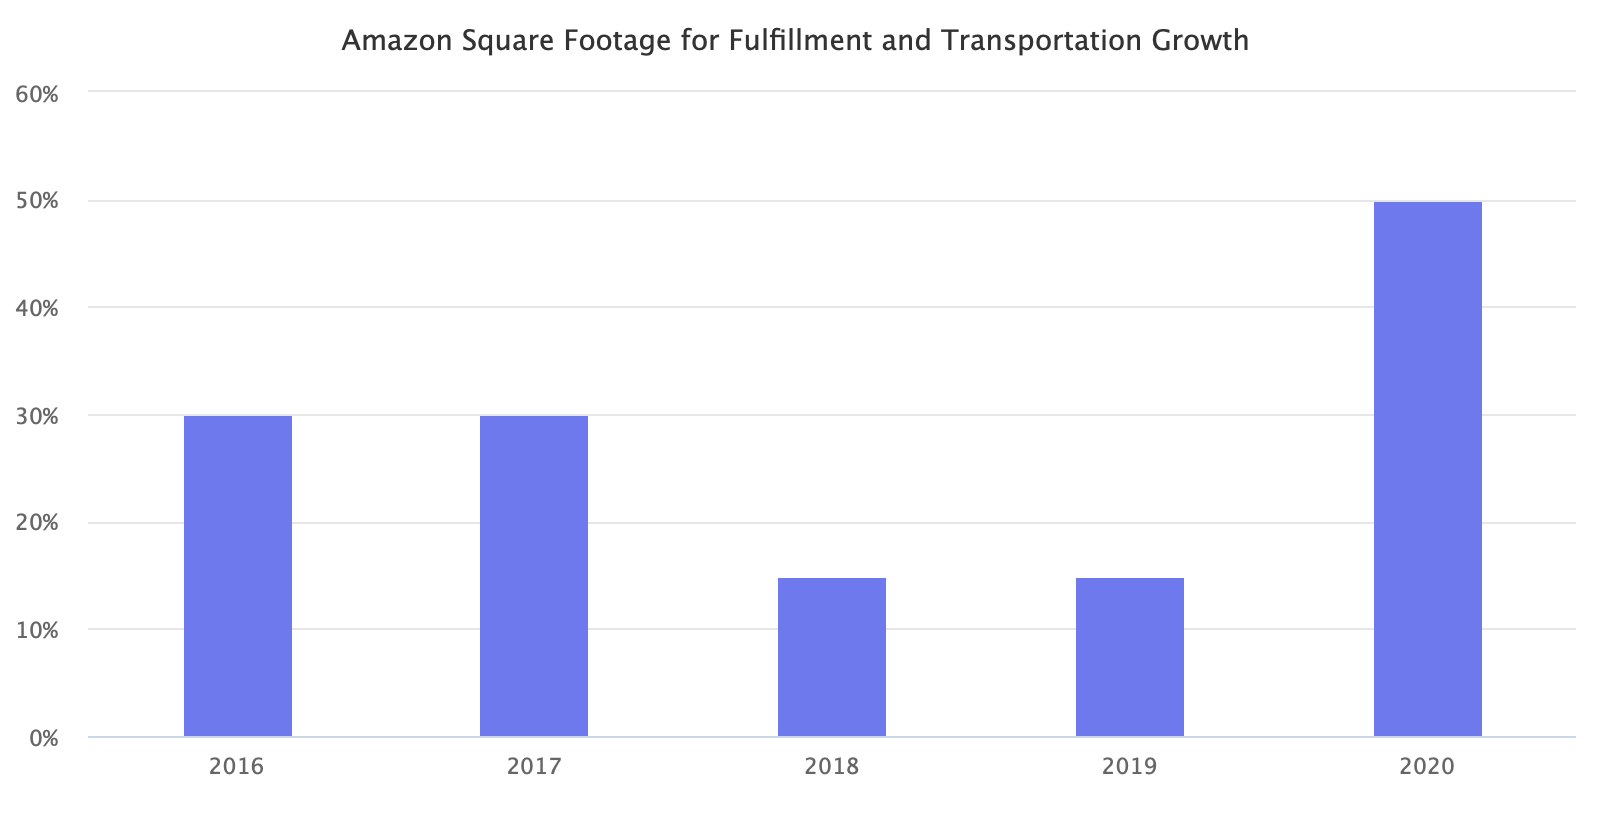 Amazon Square Footage for Fulfillment and Transportation Growth